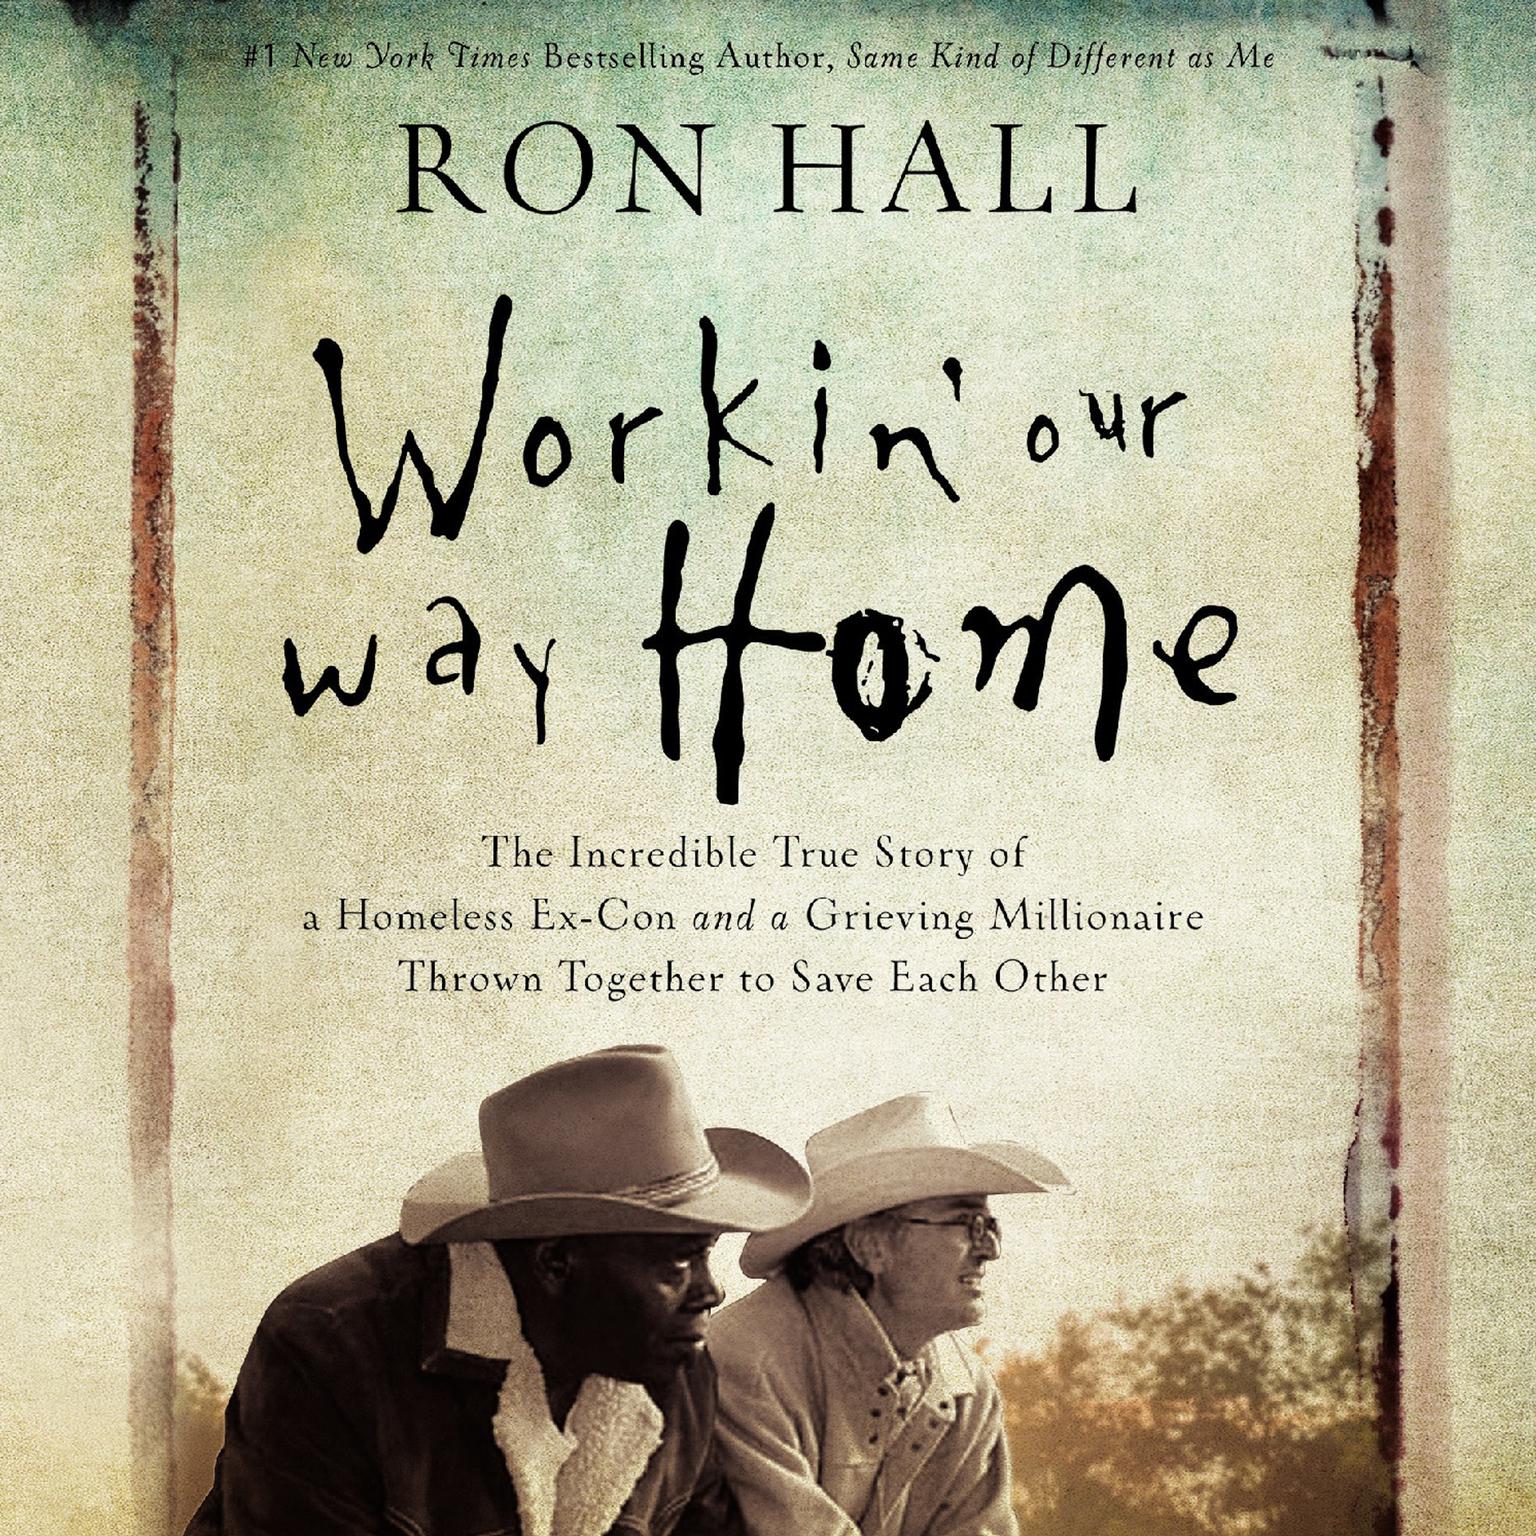 Workin Our Way Home: The Incredible True Story of a Homeless Ex-Con and a Grieving Millionaire Thrown Together to Save Each Other Audiobook, by Ron Hall